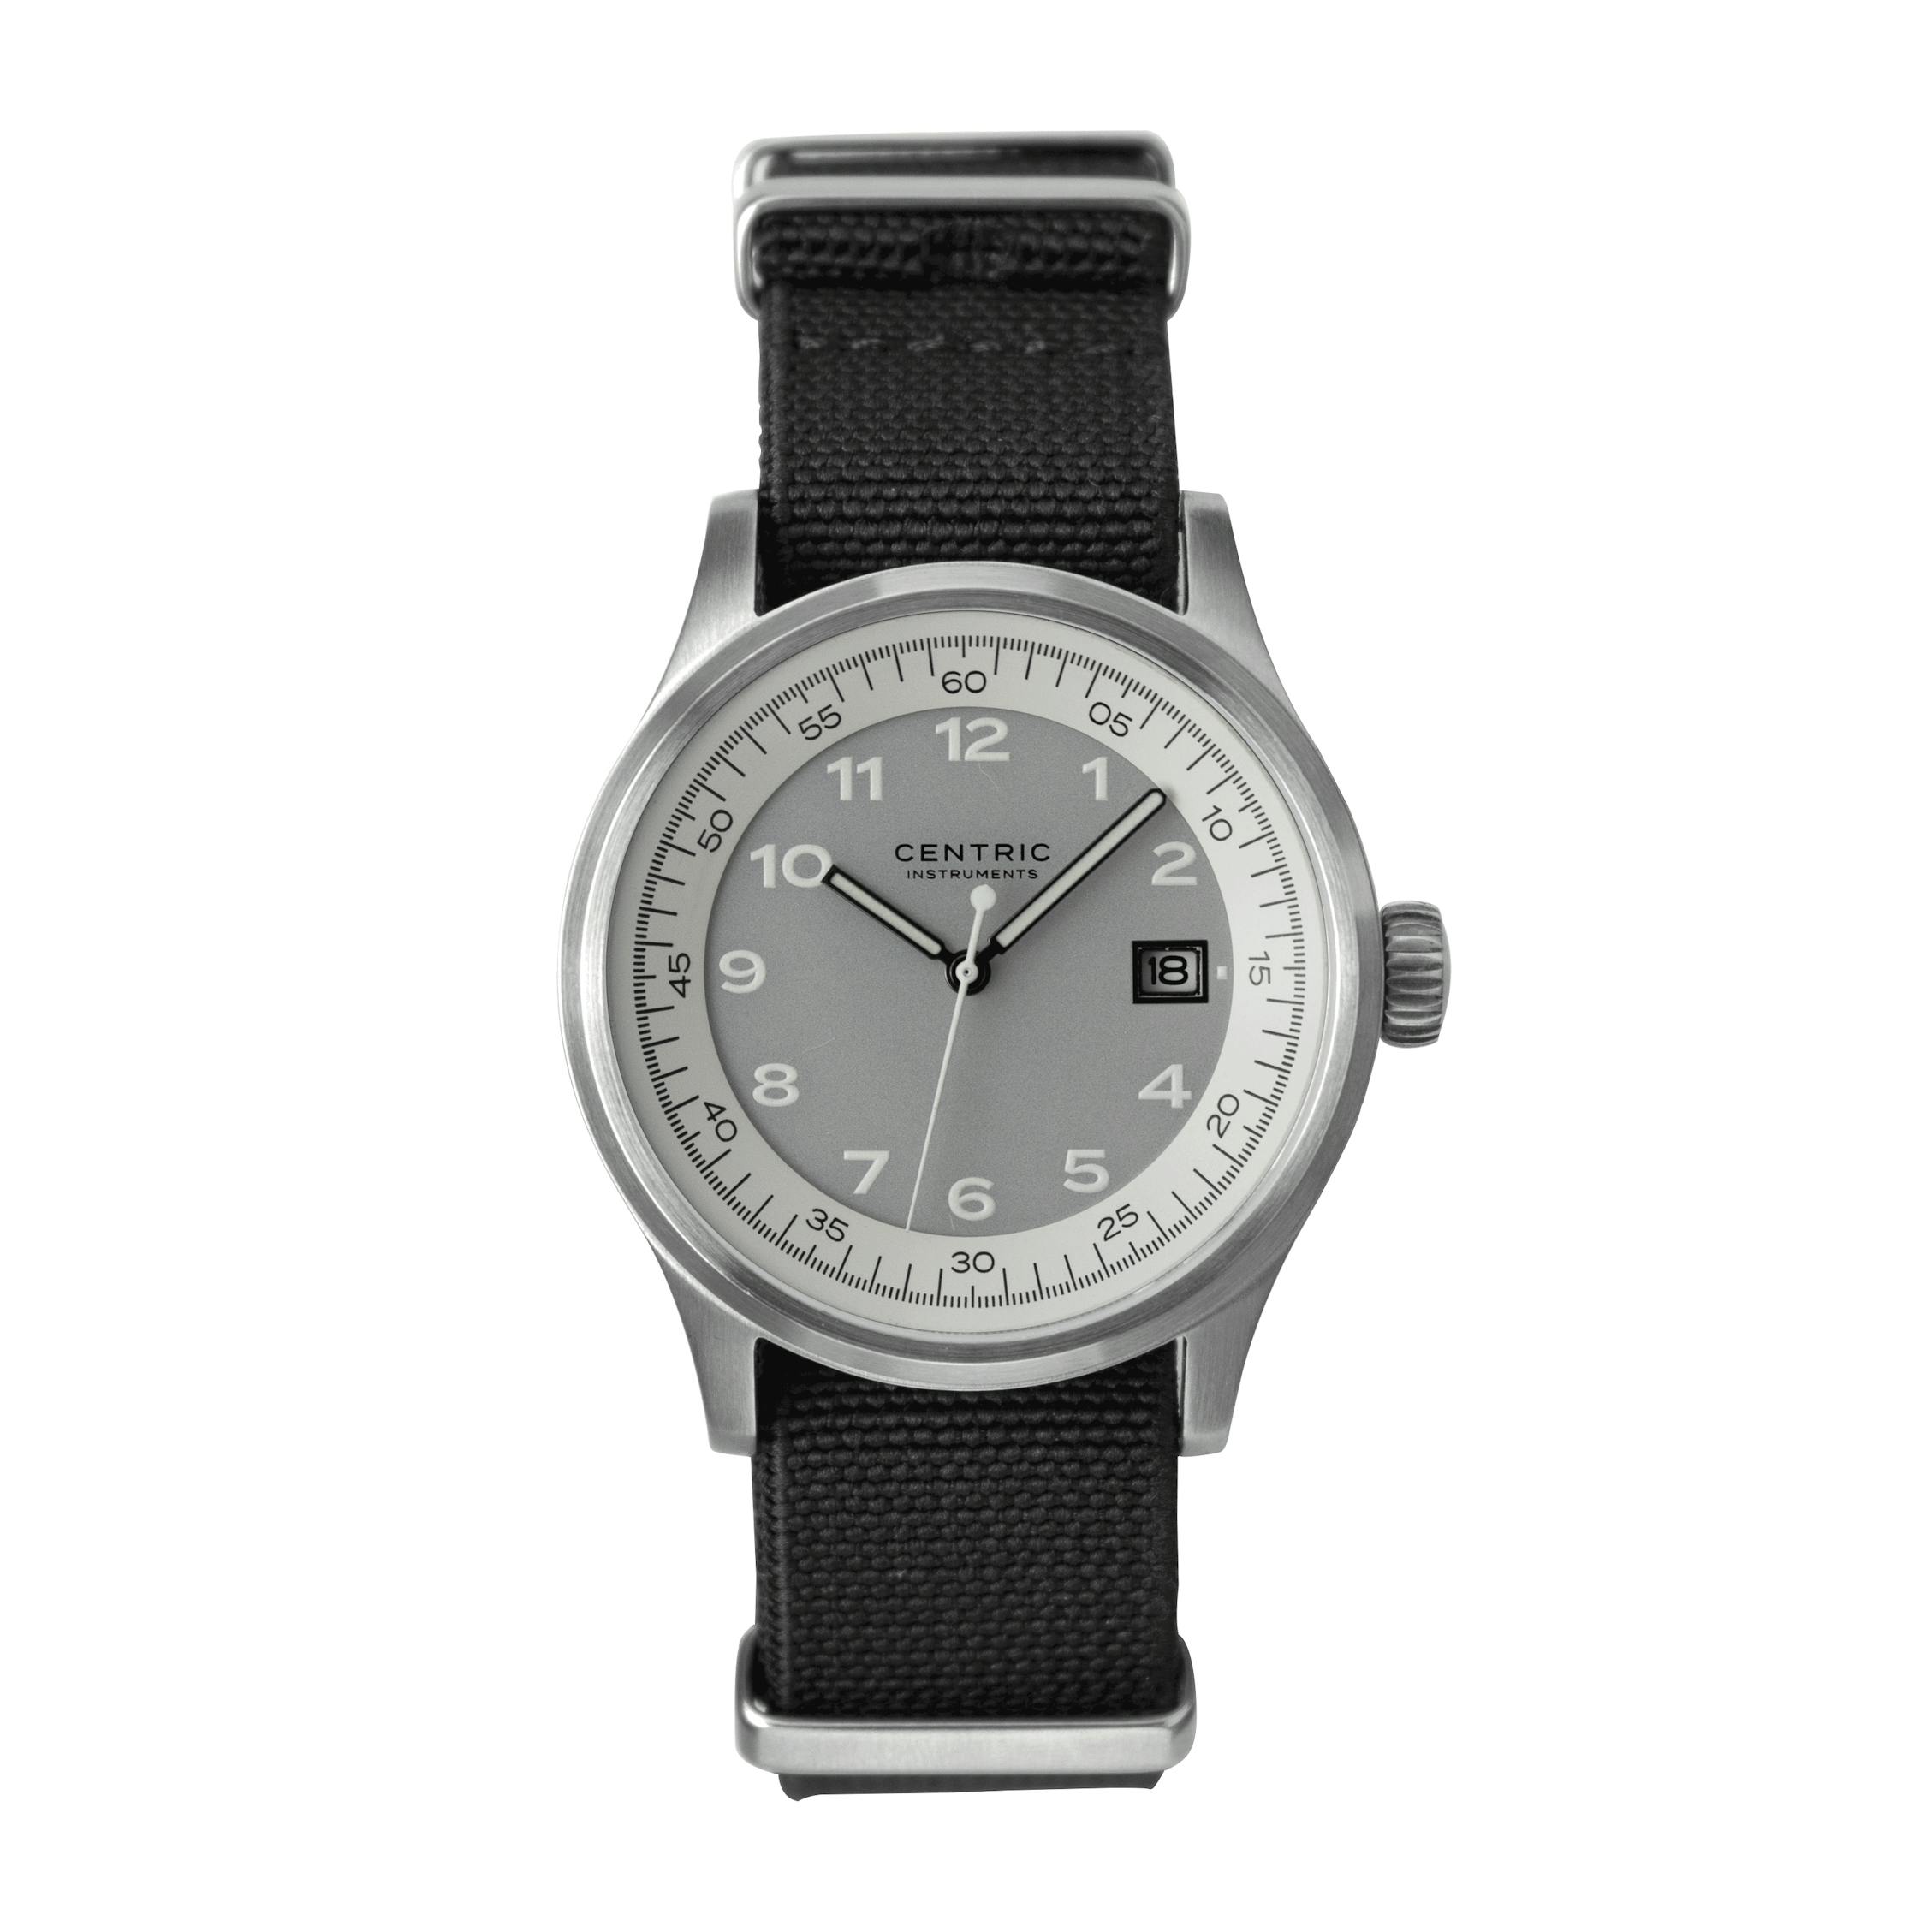 Centric Instruments Lightwell Field Watch MKII - Ivory | Accessories ...